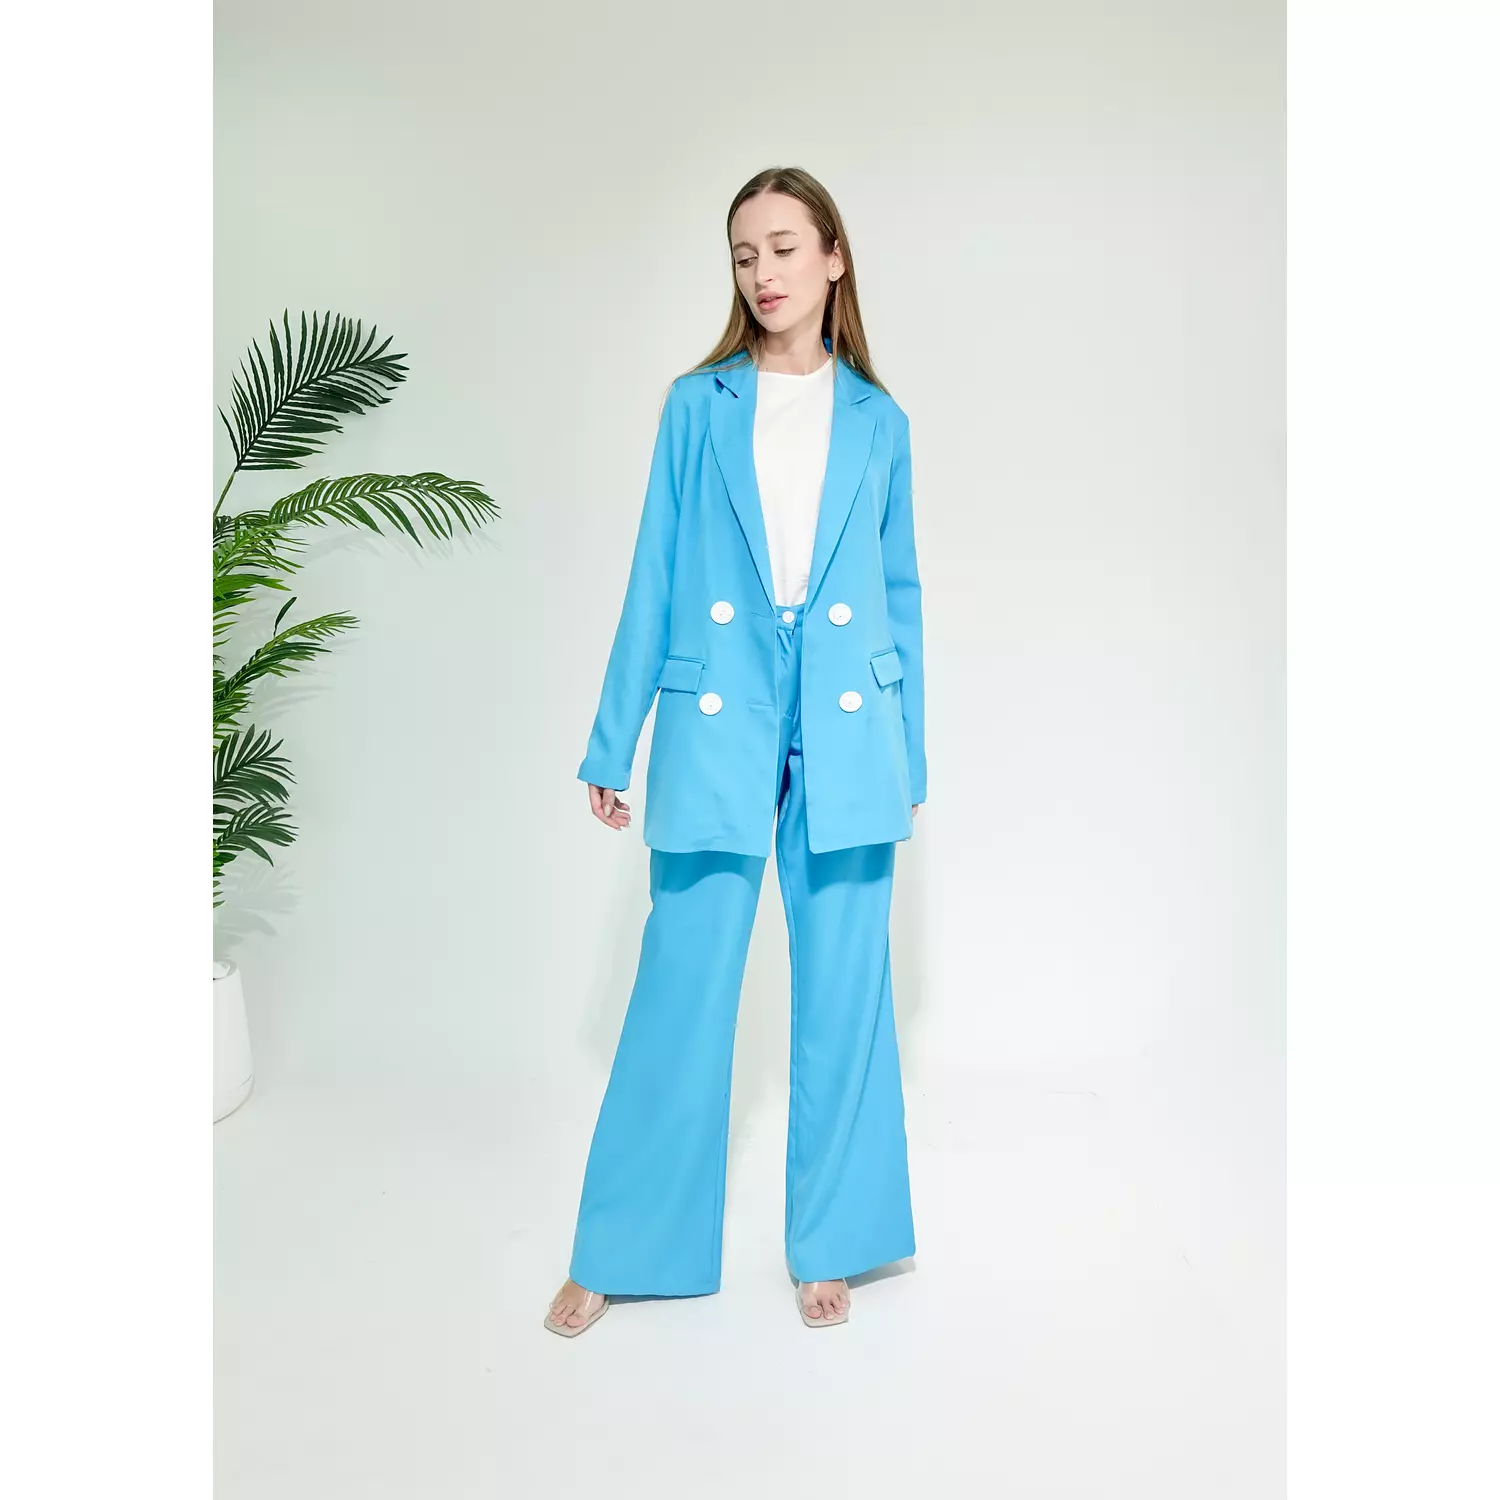 TURQUOISE SUIT 8